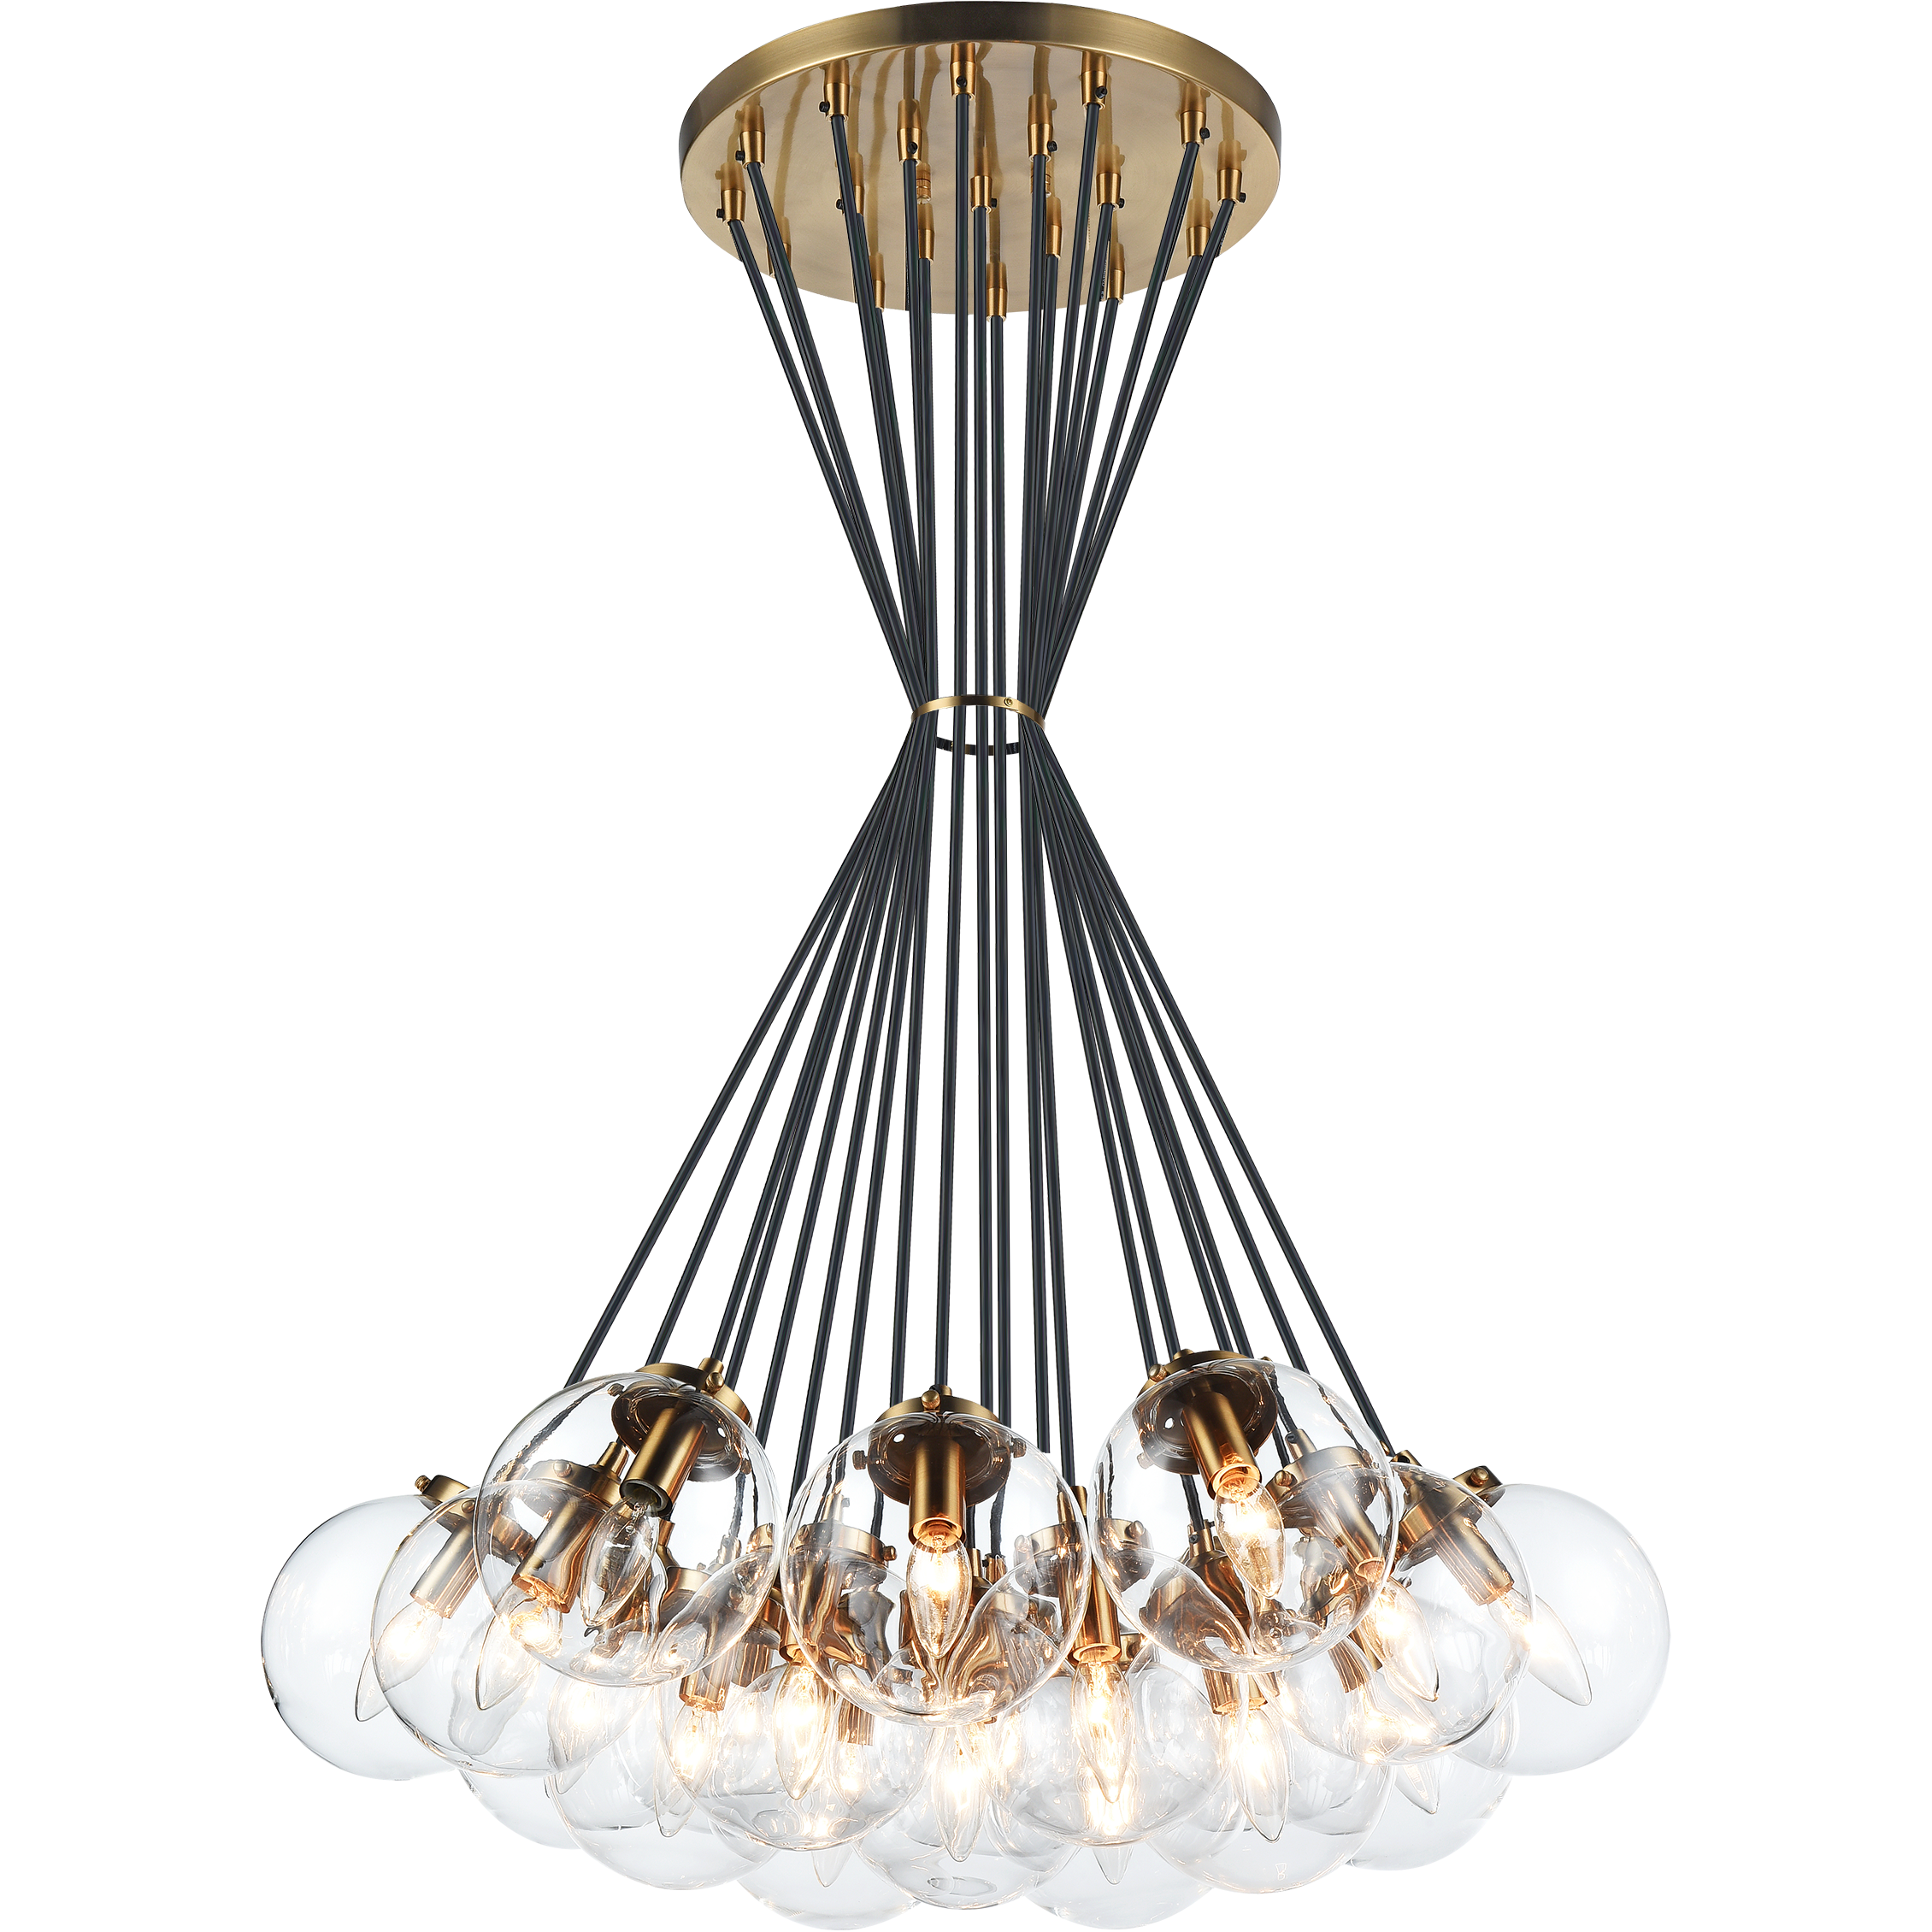 The Bougie Chandelier Aged Gold Brass CL